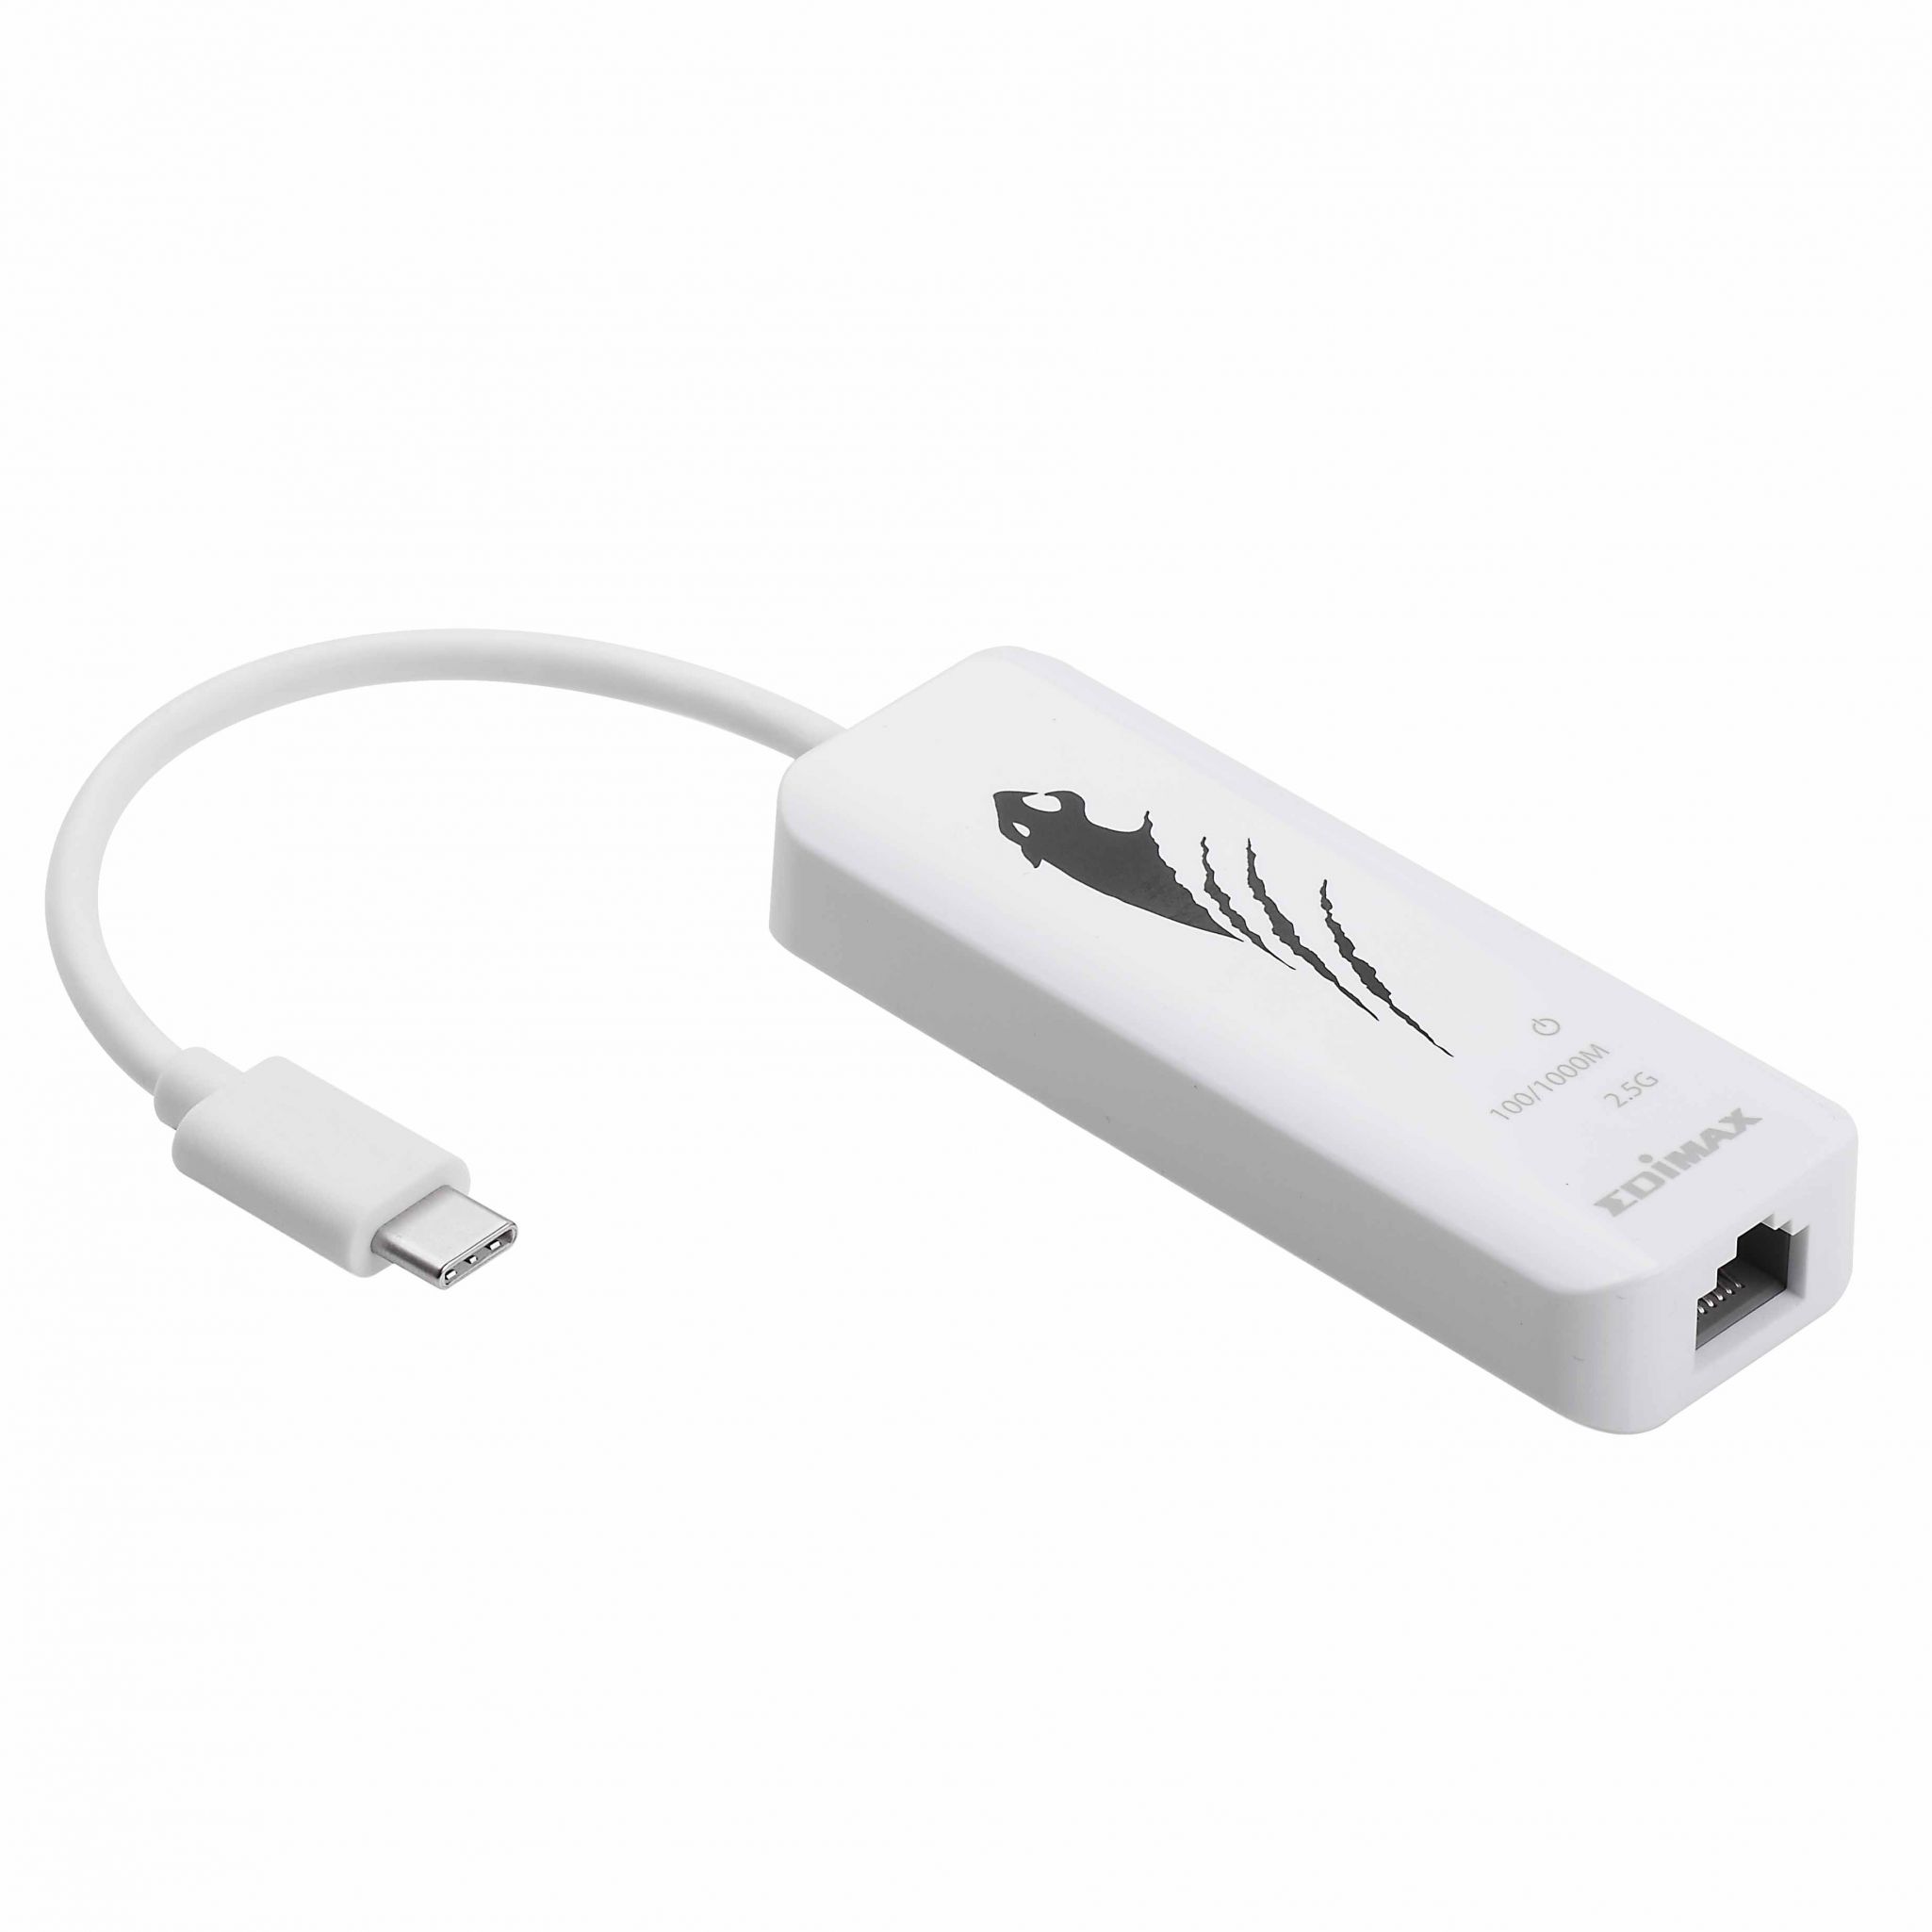 can you get gigabit over usb-c to ethernet